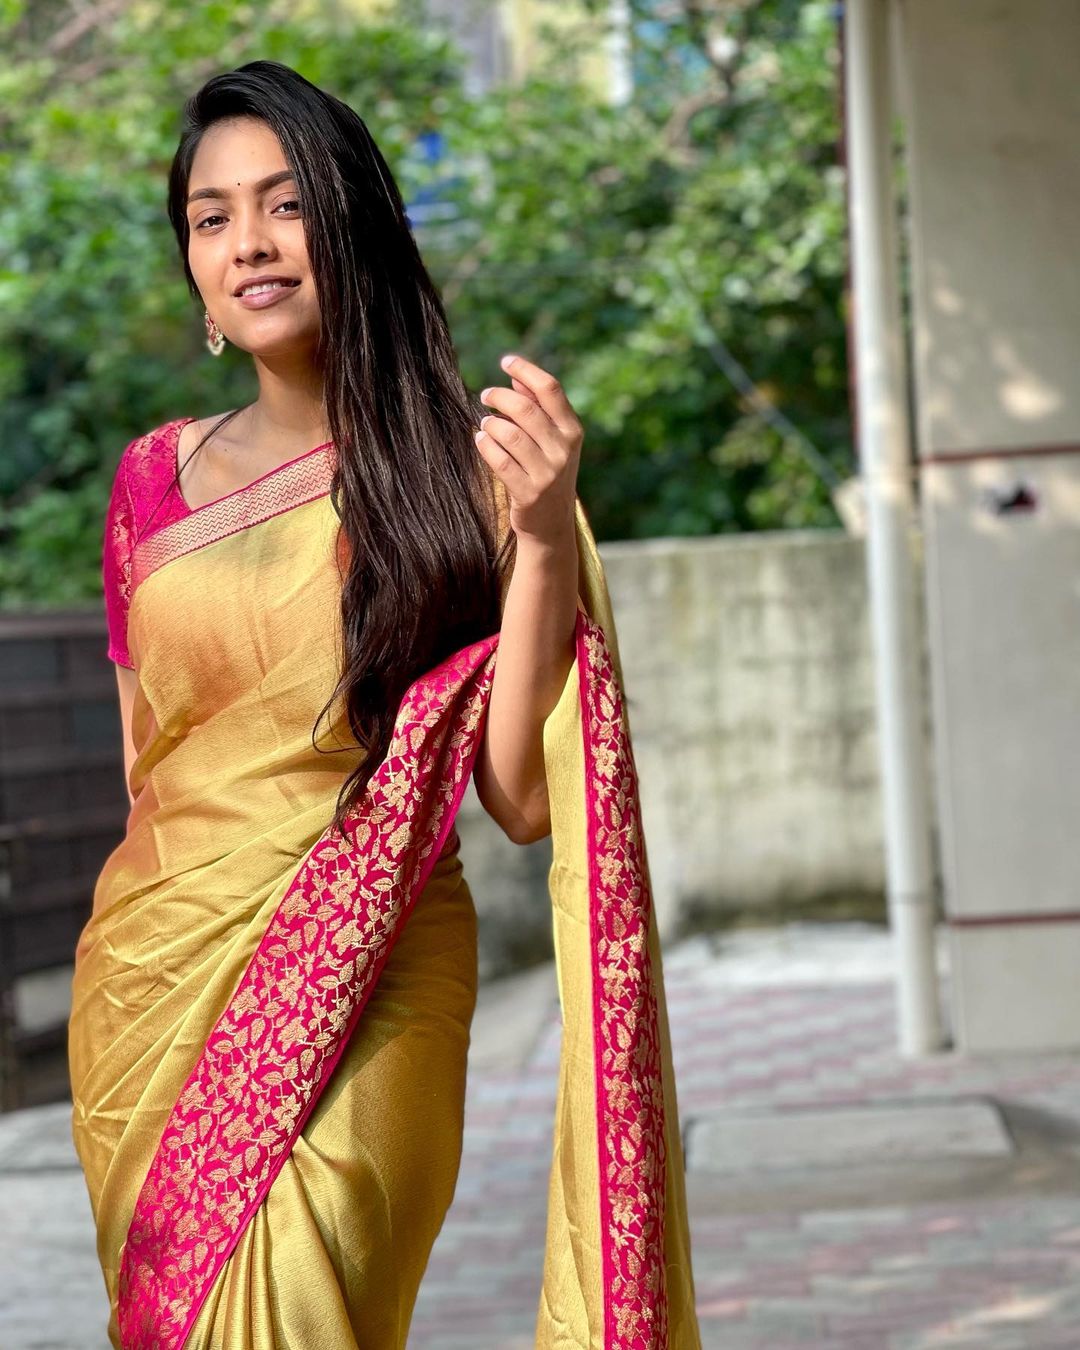 Pavithra Janani in yellow and pink saree